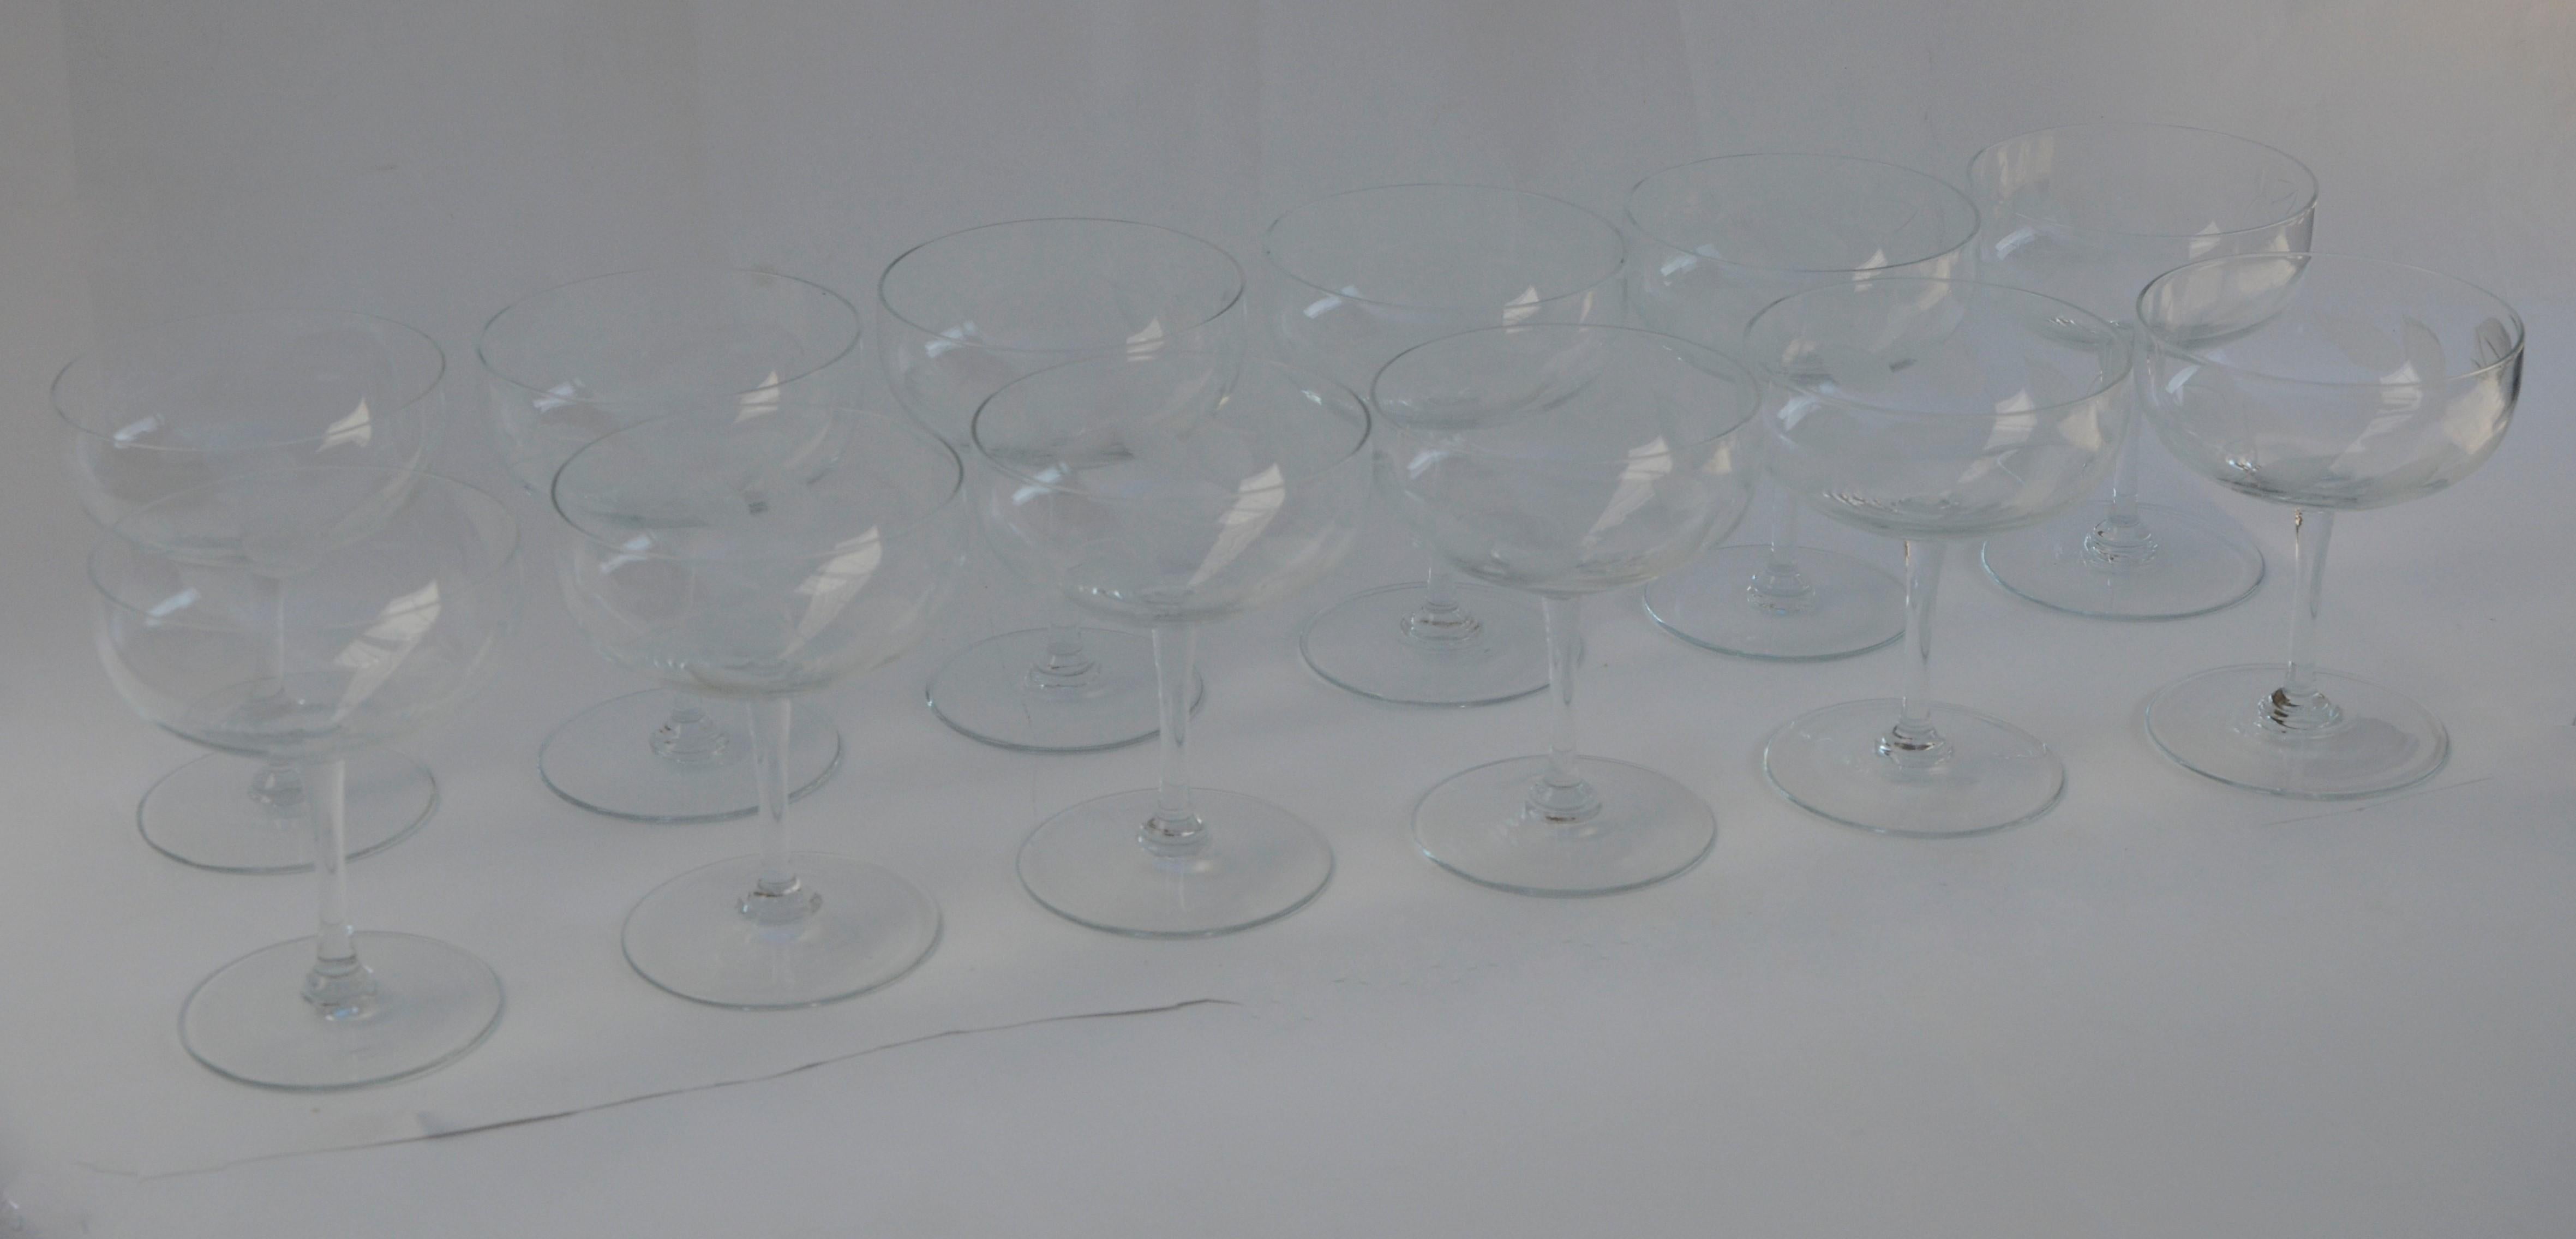 Offered is a set of twelve Mid-Century Modern cut glass frosted rose, stem and leaf theme on clear glass champagne coupes / cocktail glasses / goblets. This lovely set can be used for entertaining for events anytime during the year. Would make a